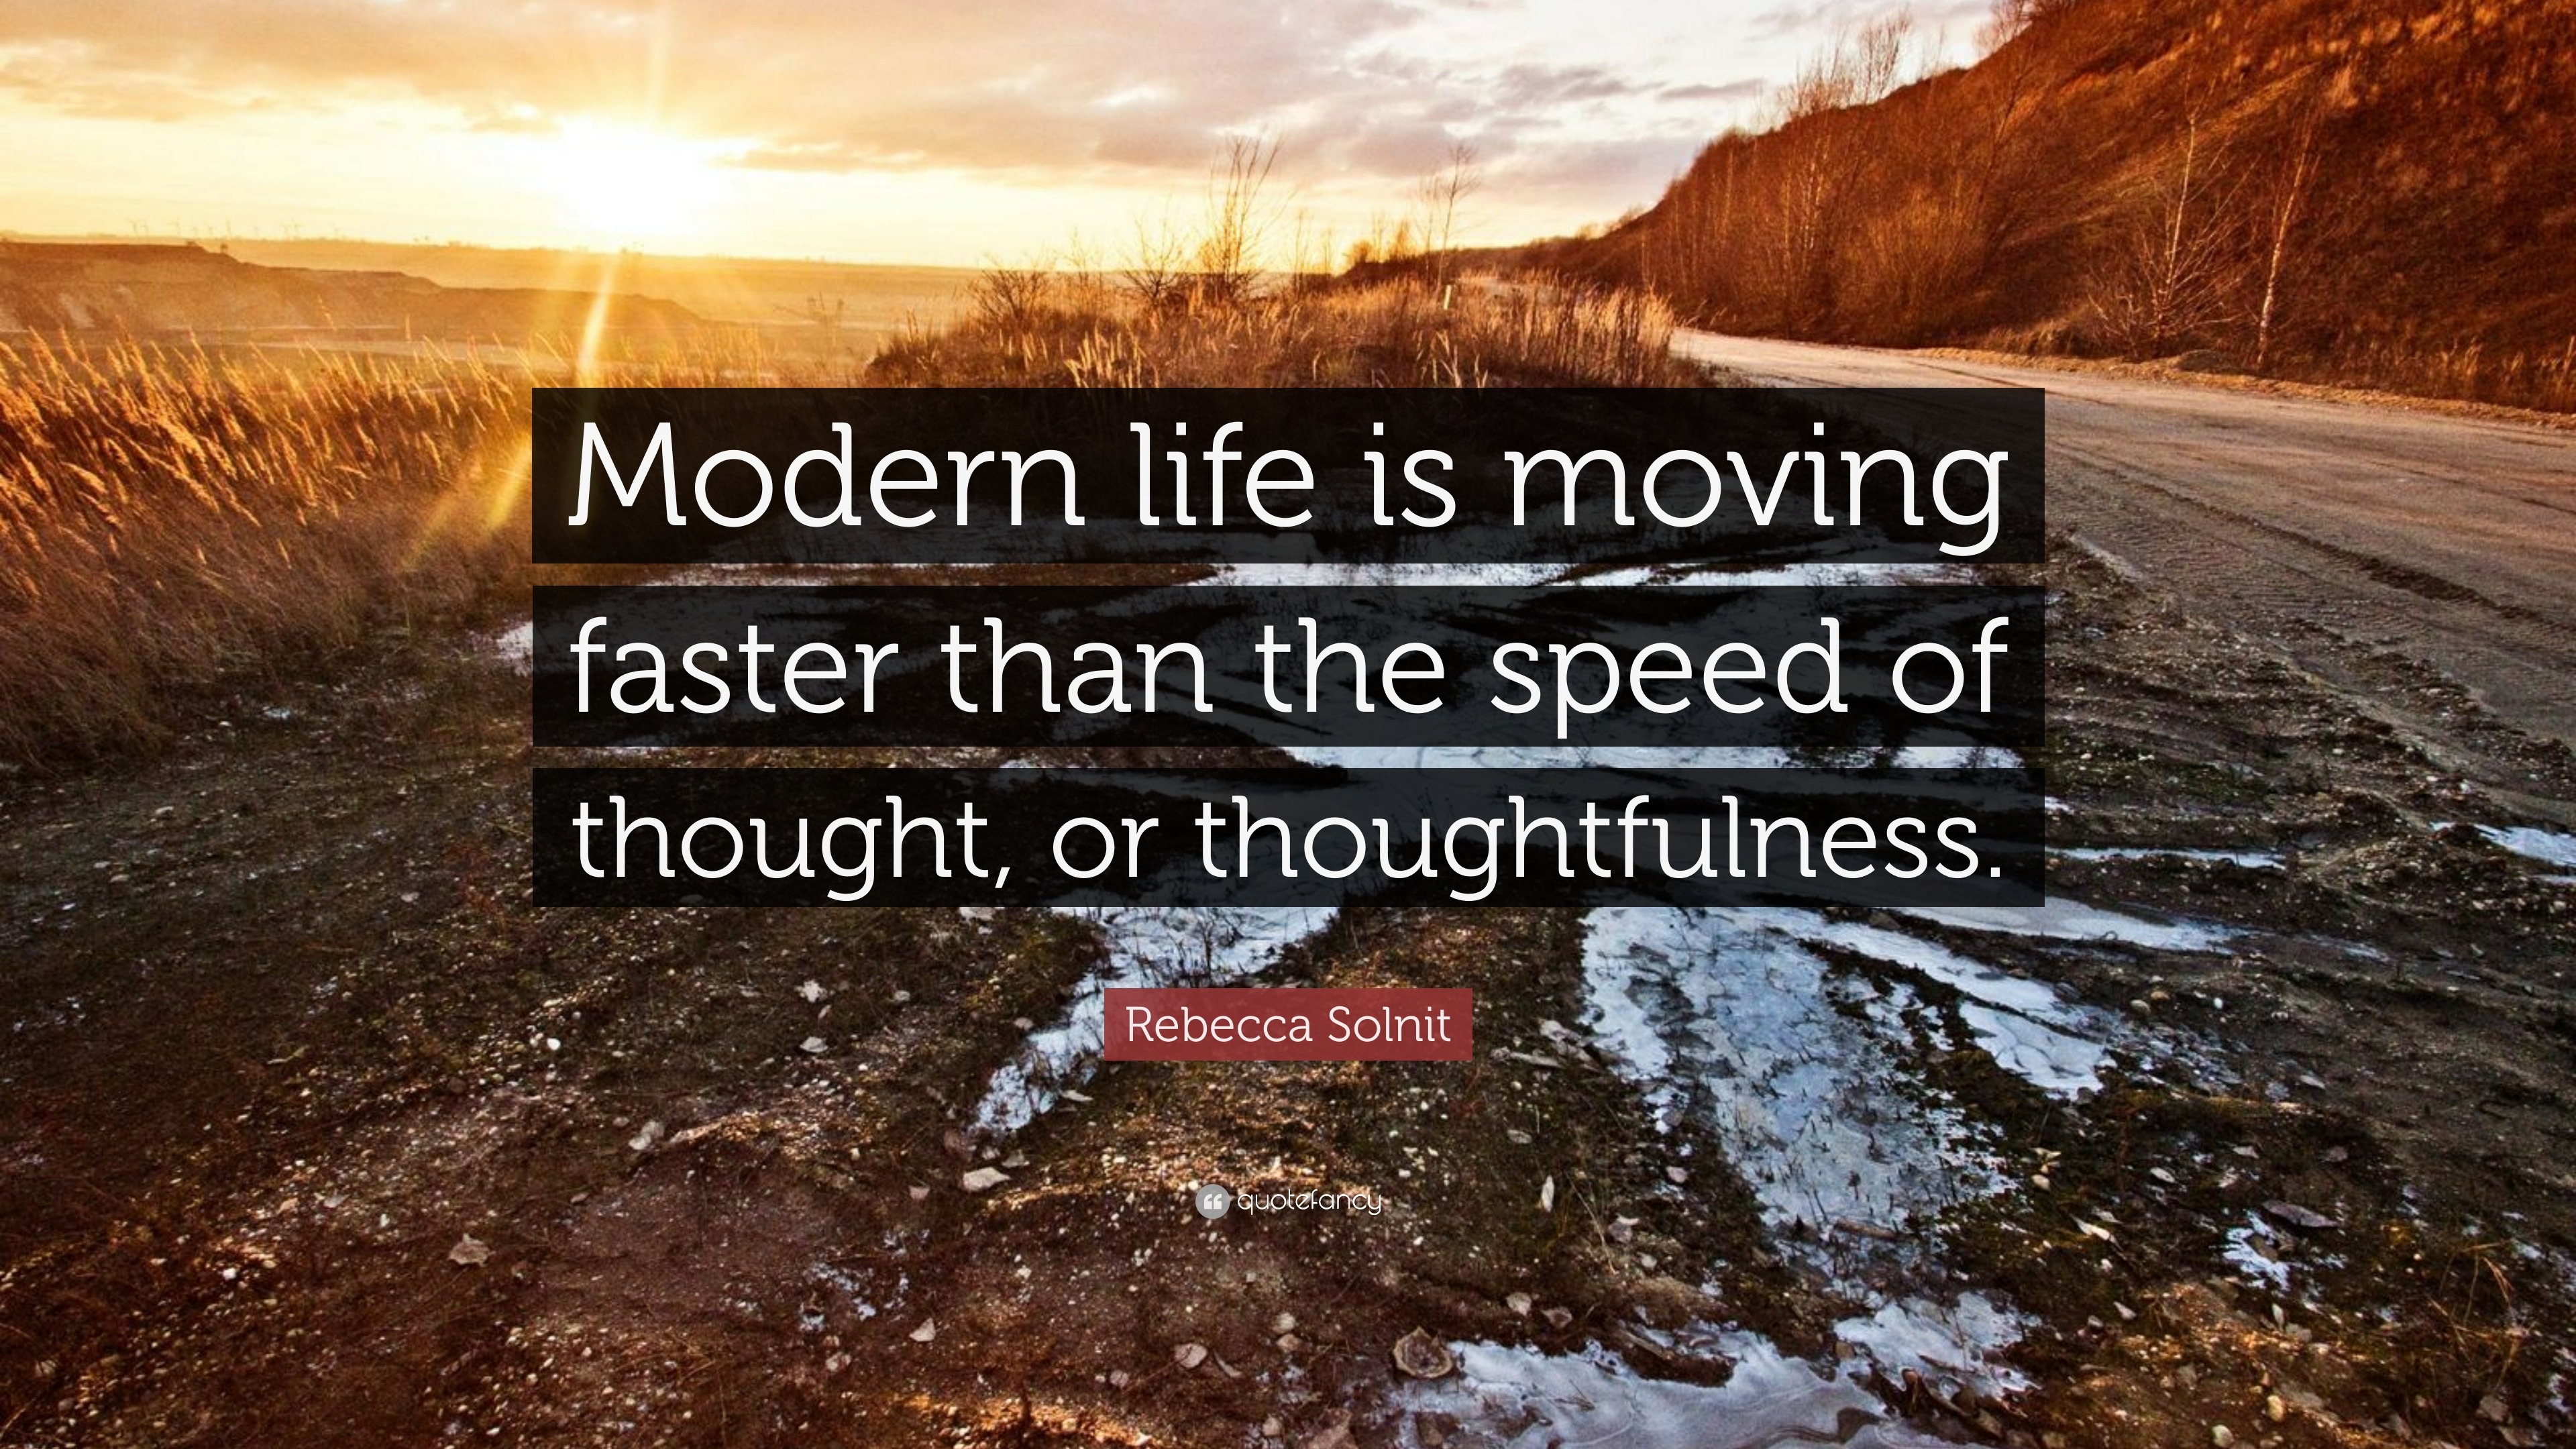 Rebecca Solnit Quote: “Modern life is moving faster than the speed of ...